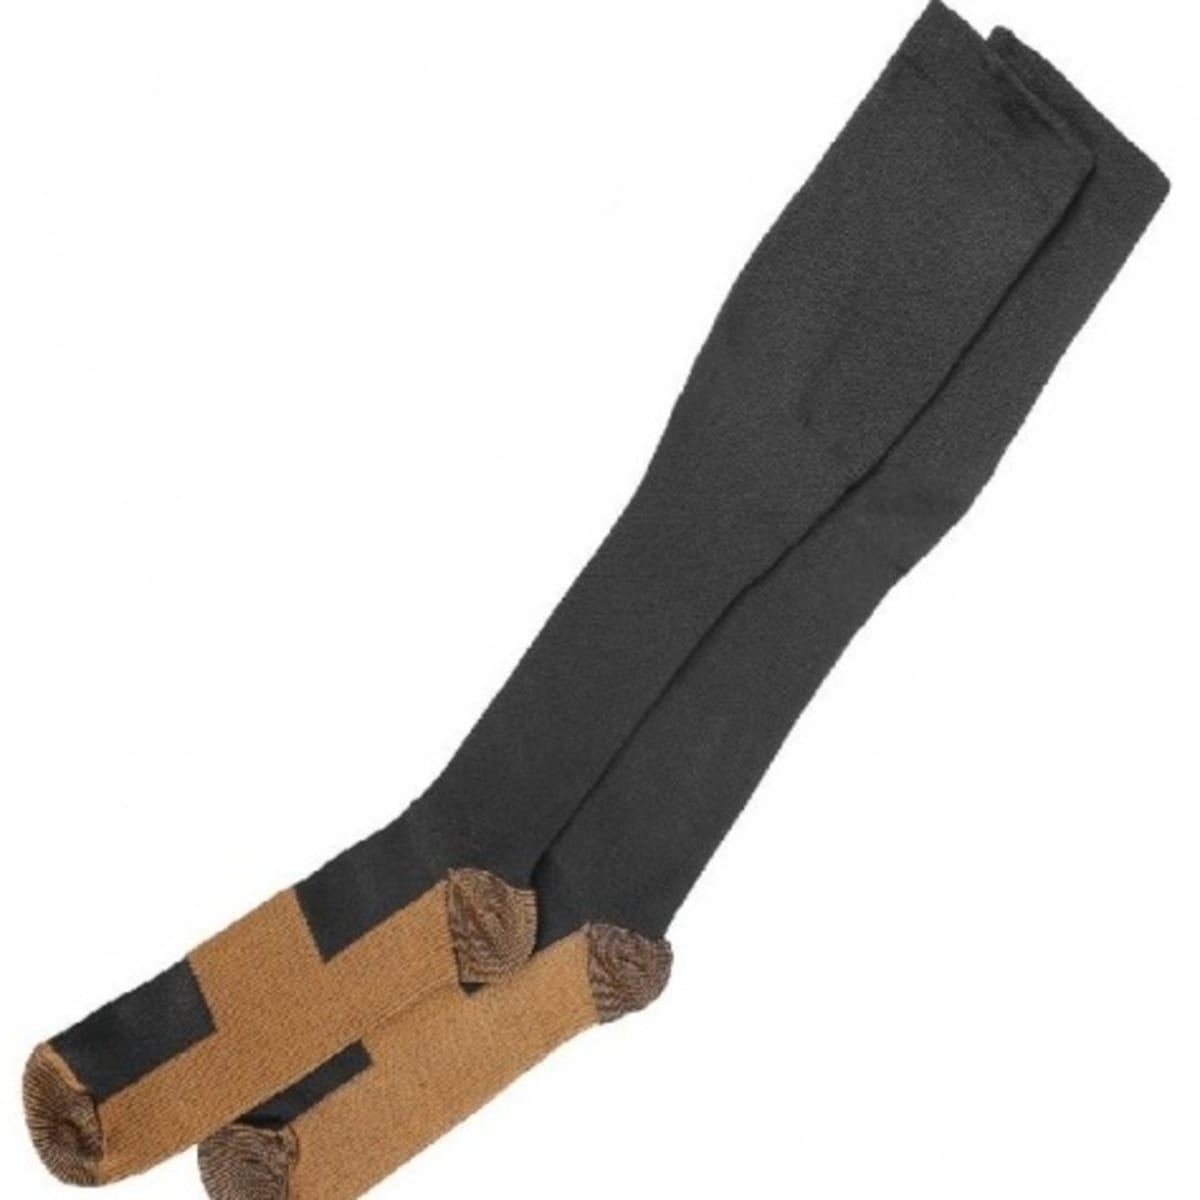 Dr Miracle's Miracle Copper-Infused Anti-Fatigue Compression Socks